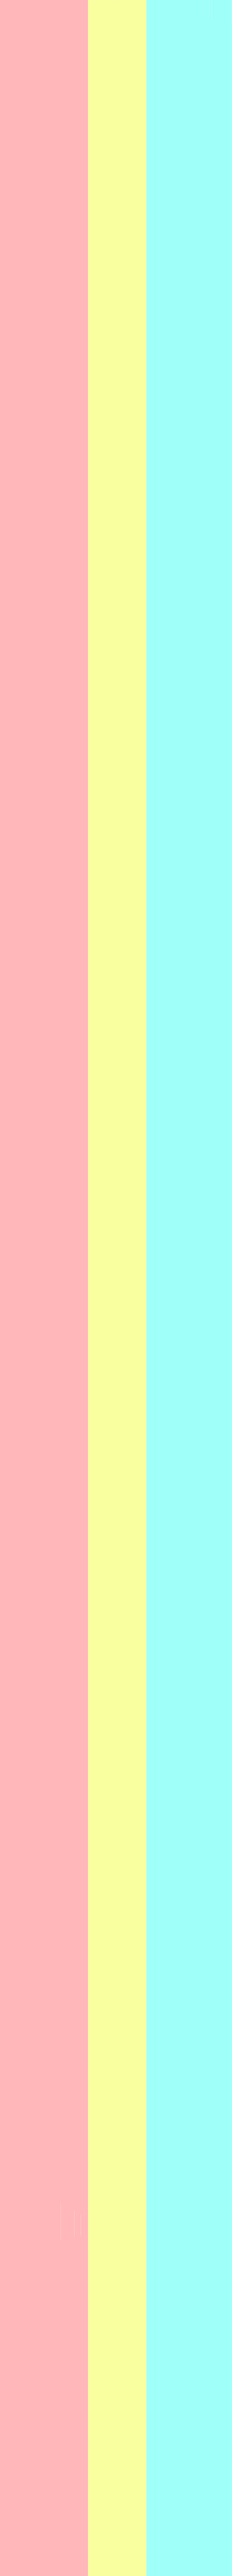 Pansexual wallpapers for yall pans links included  rpansexual